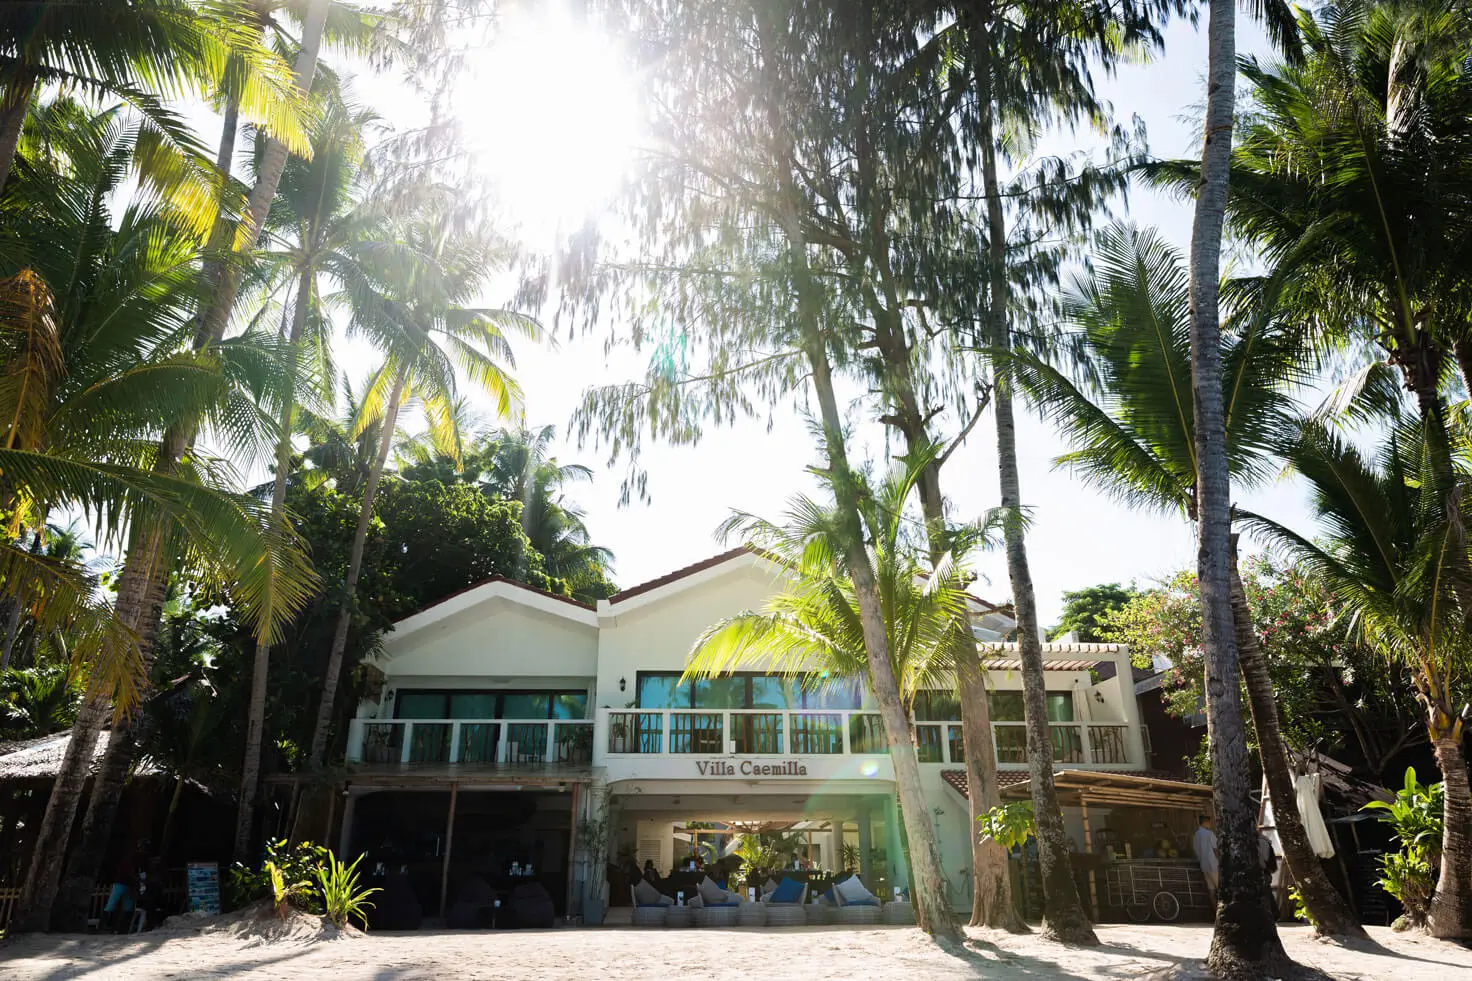 Villa Caemilla is one of Boracay's best boutique hotels, with palm trees surrounding the white building. The hotel fronts directly onto the beach, offering easy access to the sandy shore.